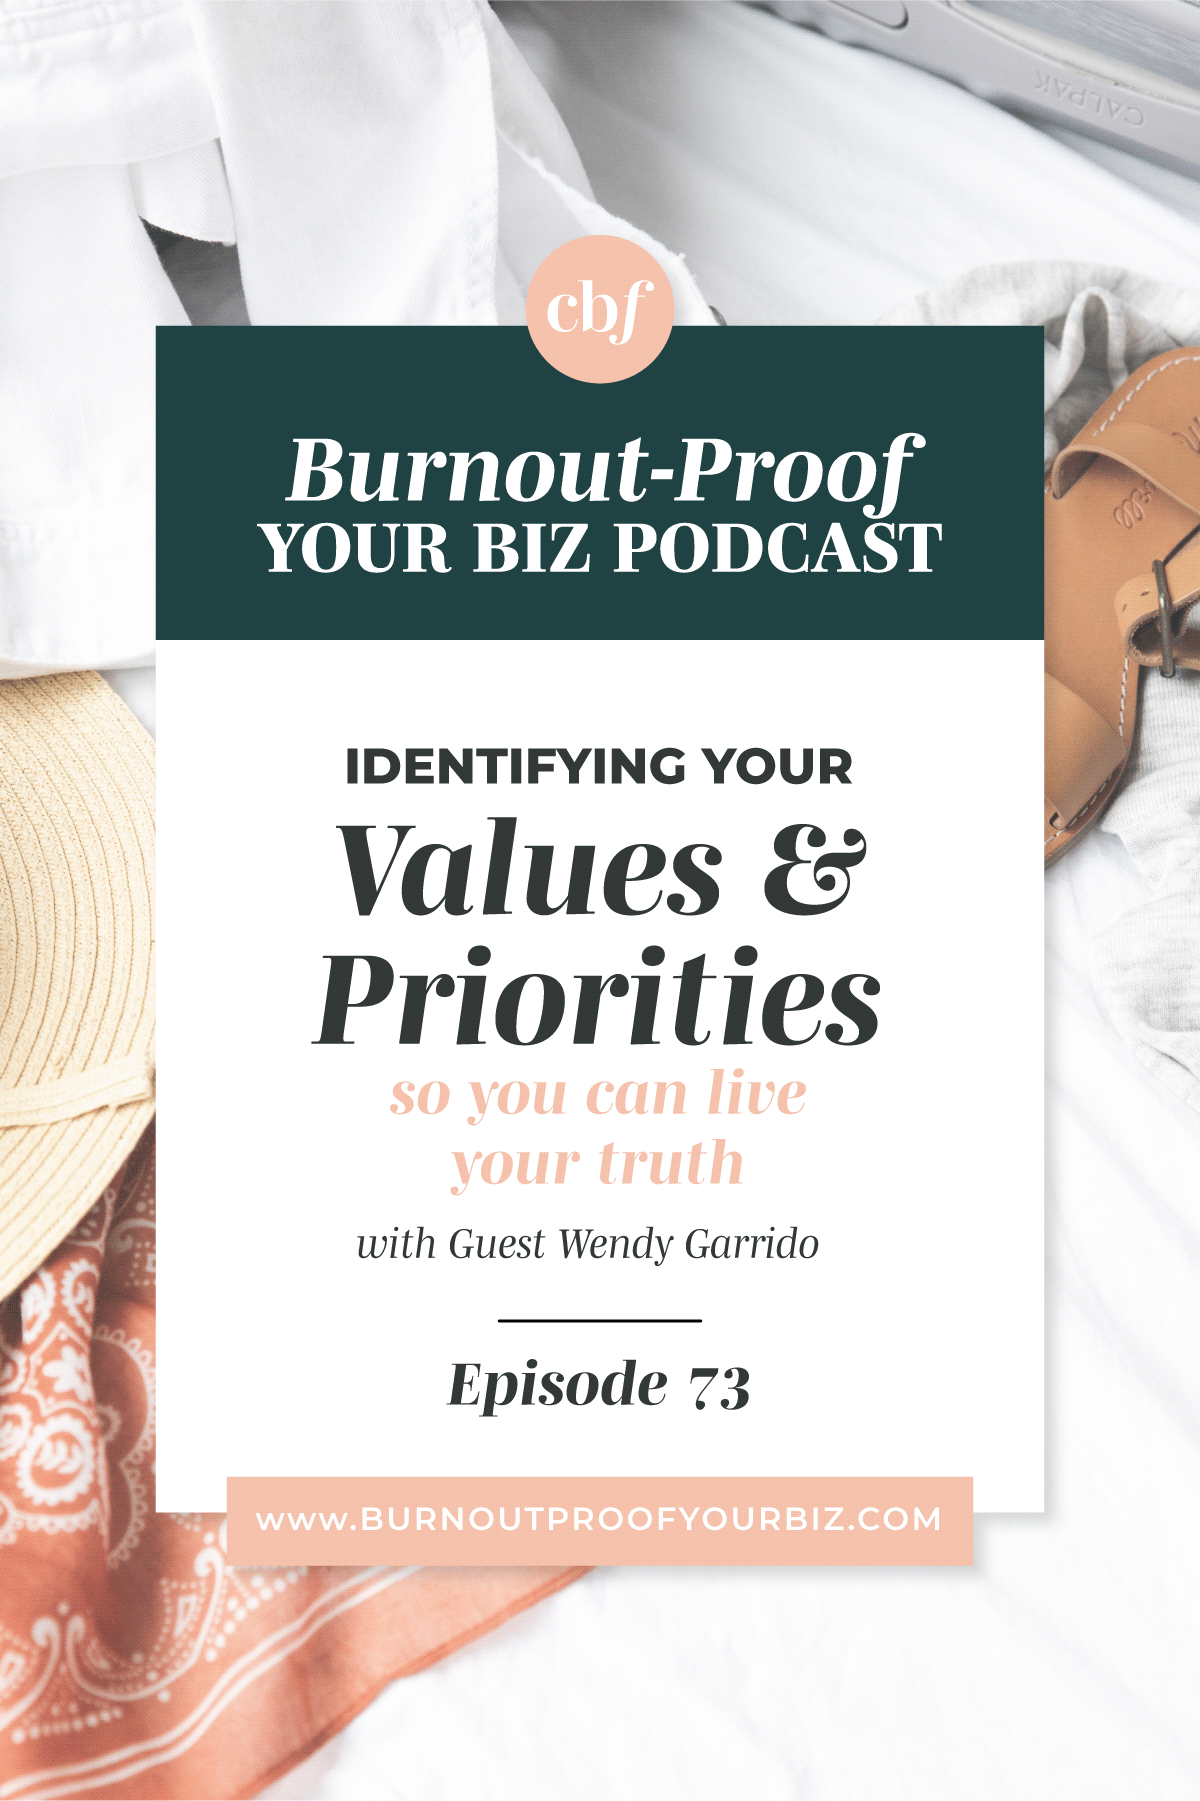 Burnout-Proof Your Biz Podcast with Chelsea B Foster | Episode 073 - Getting Out of Your Head and Into Your Body with Wendy Garrido